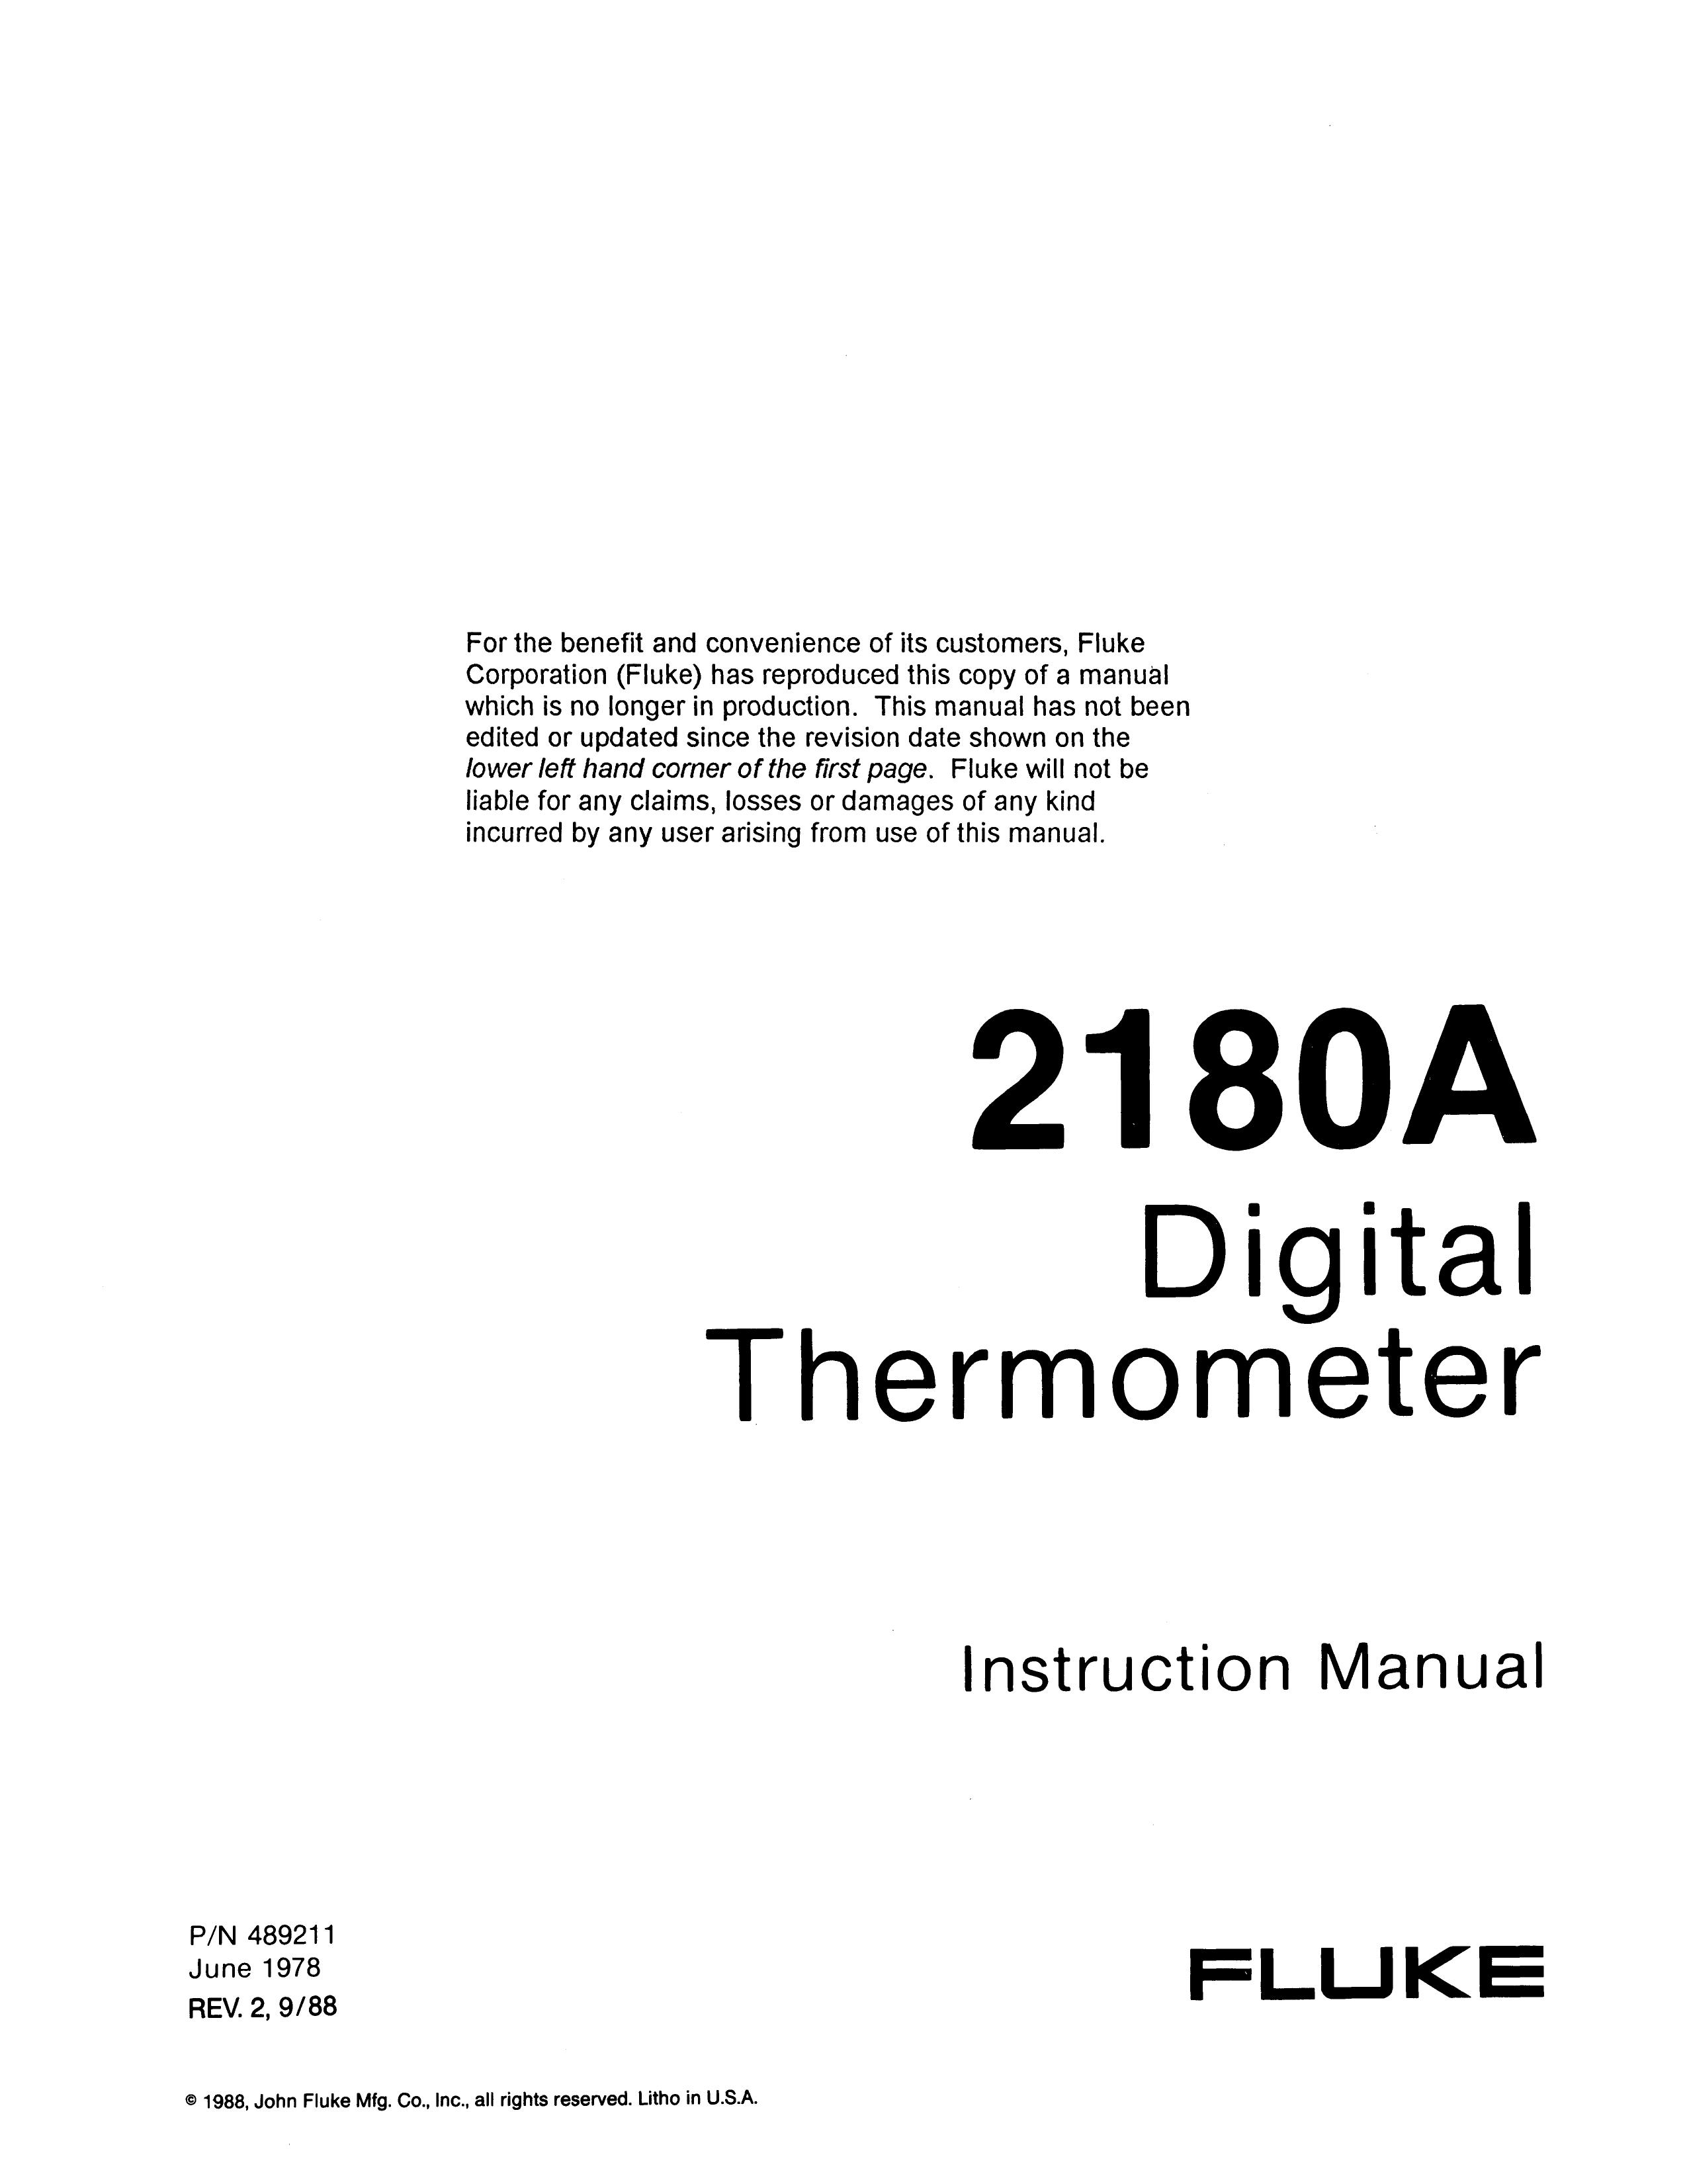 Fluke 2180A Thermometer User Manual